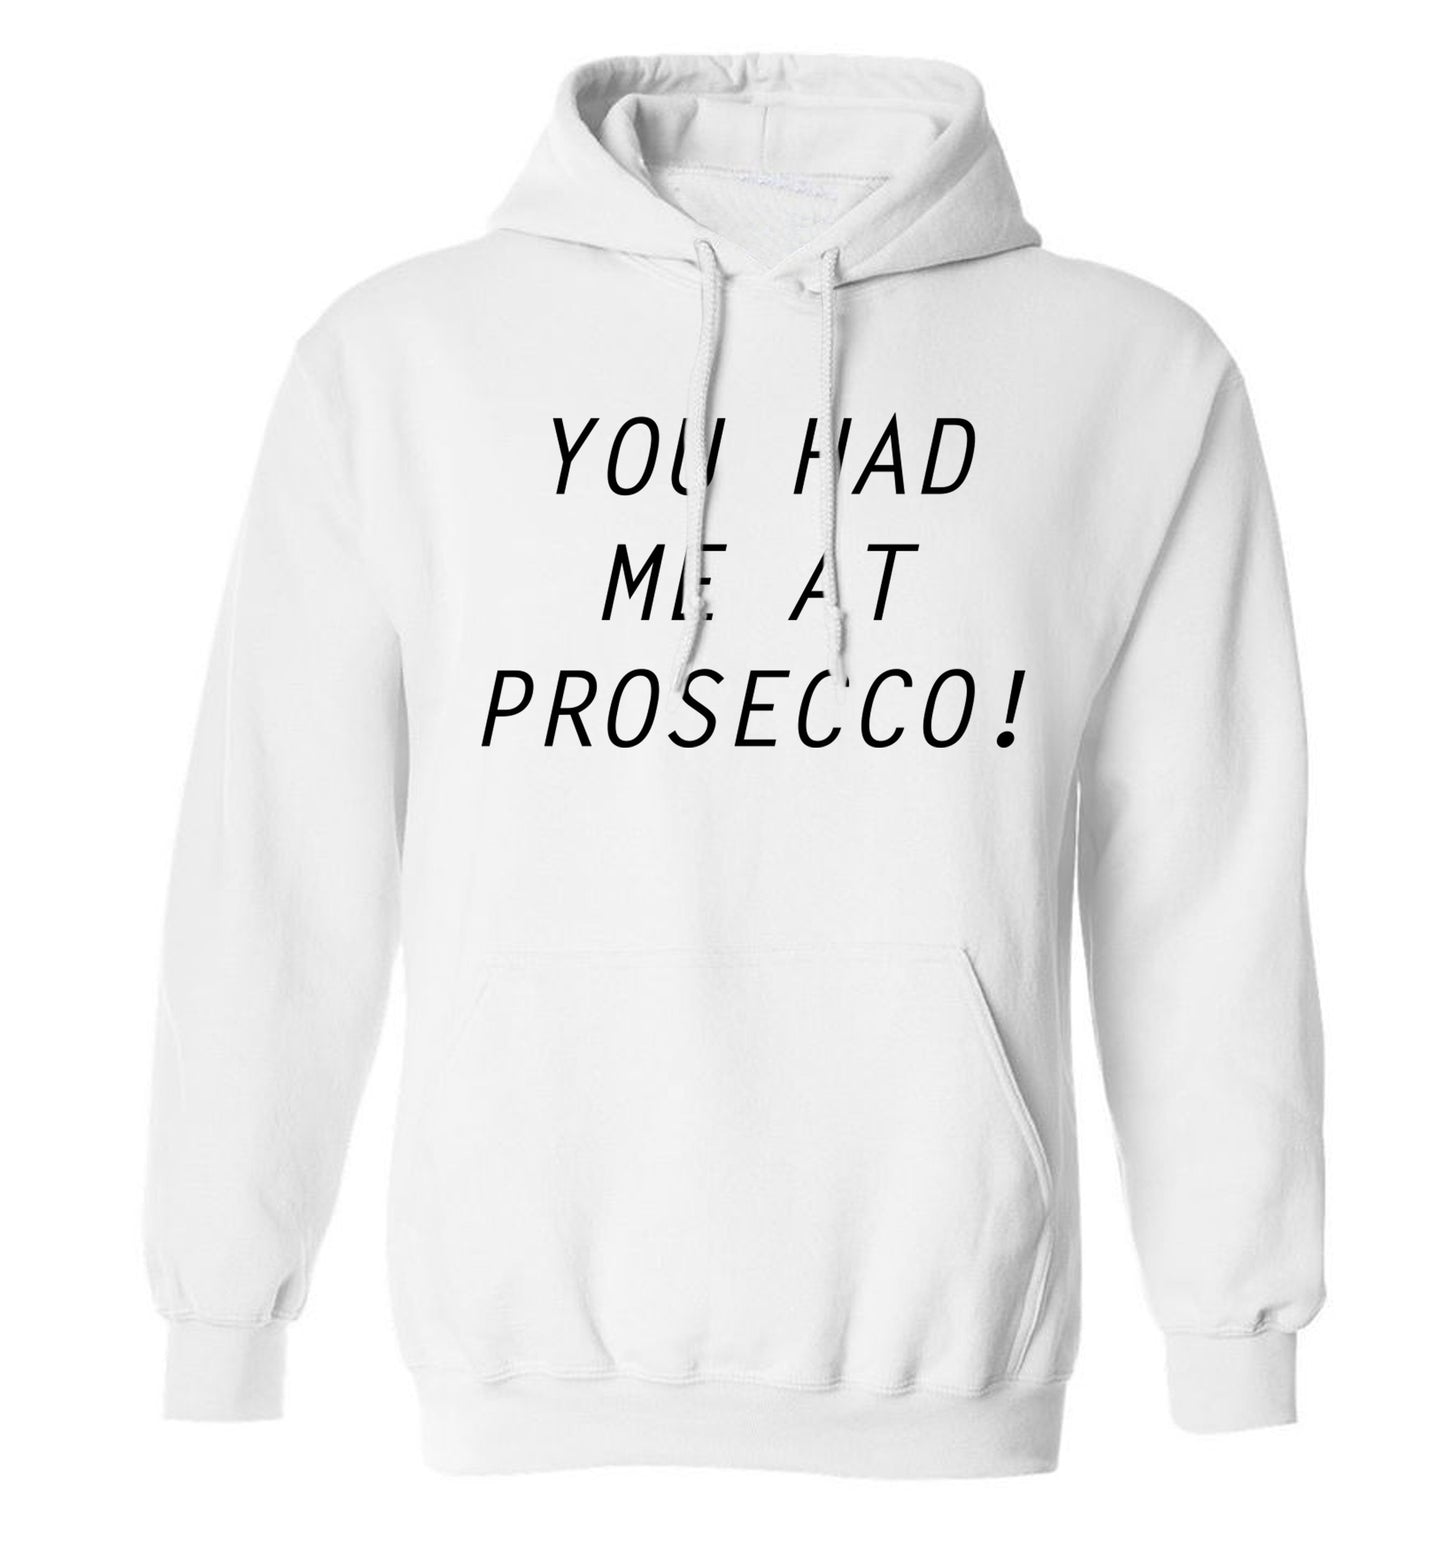 You had me at prosecco adults unisex white hoodie 2XL